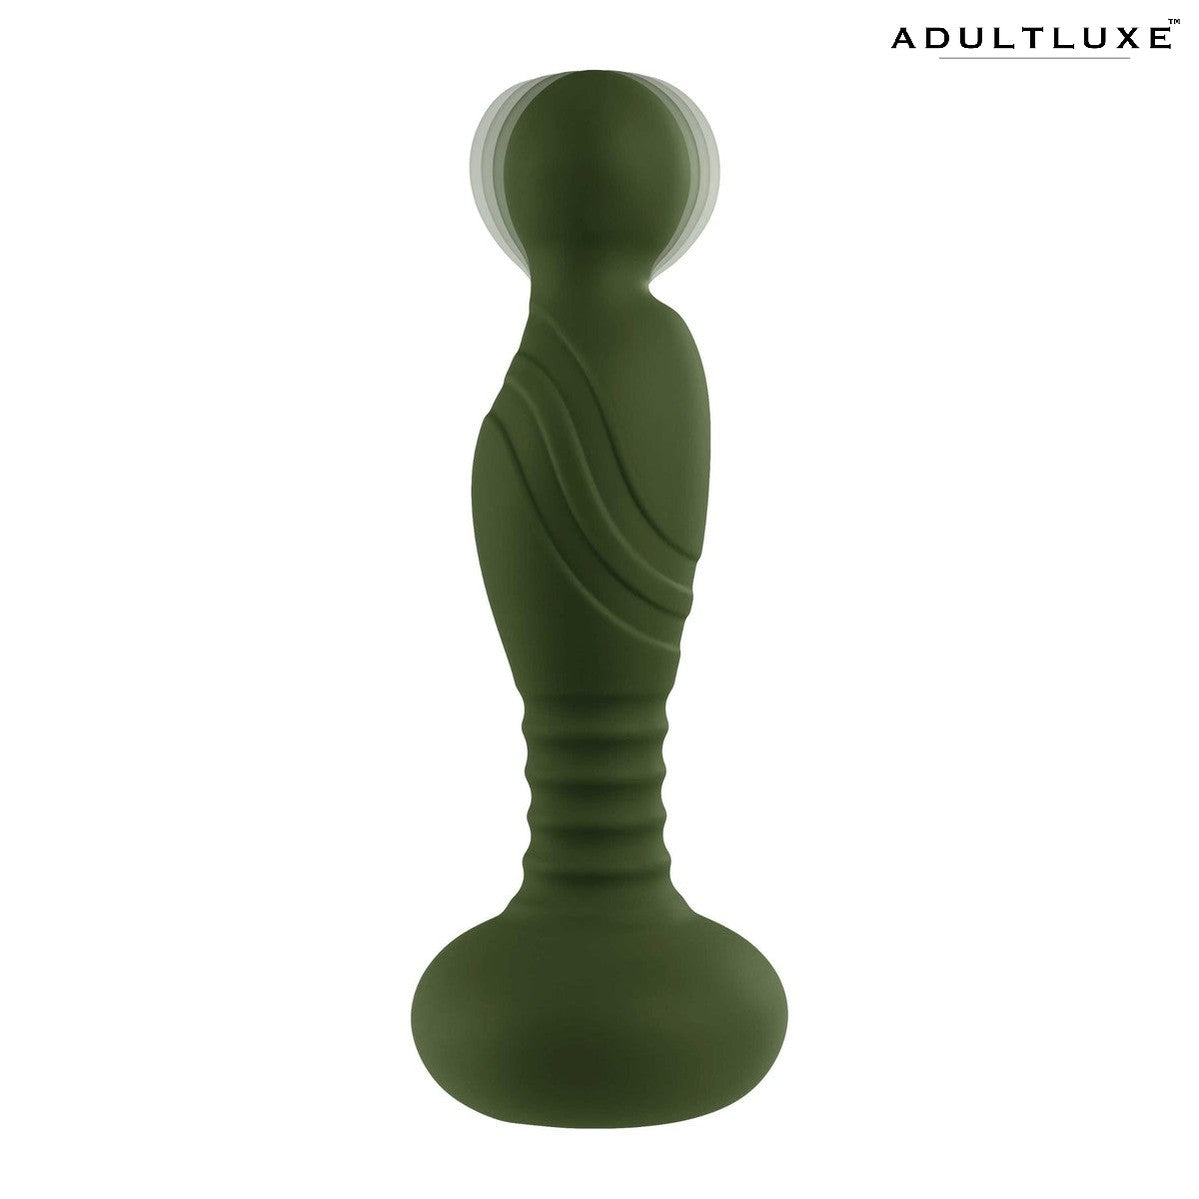 The General Dual Stimulation Anal Vibrator by Gender X